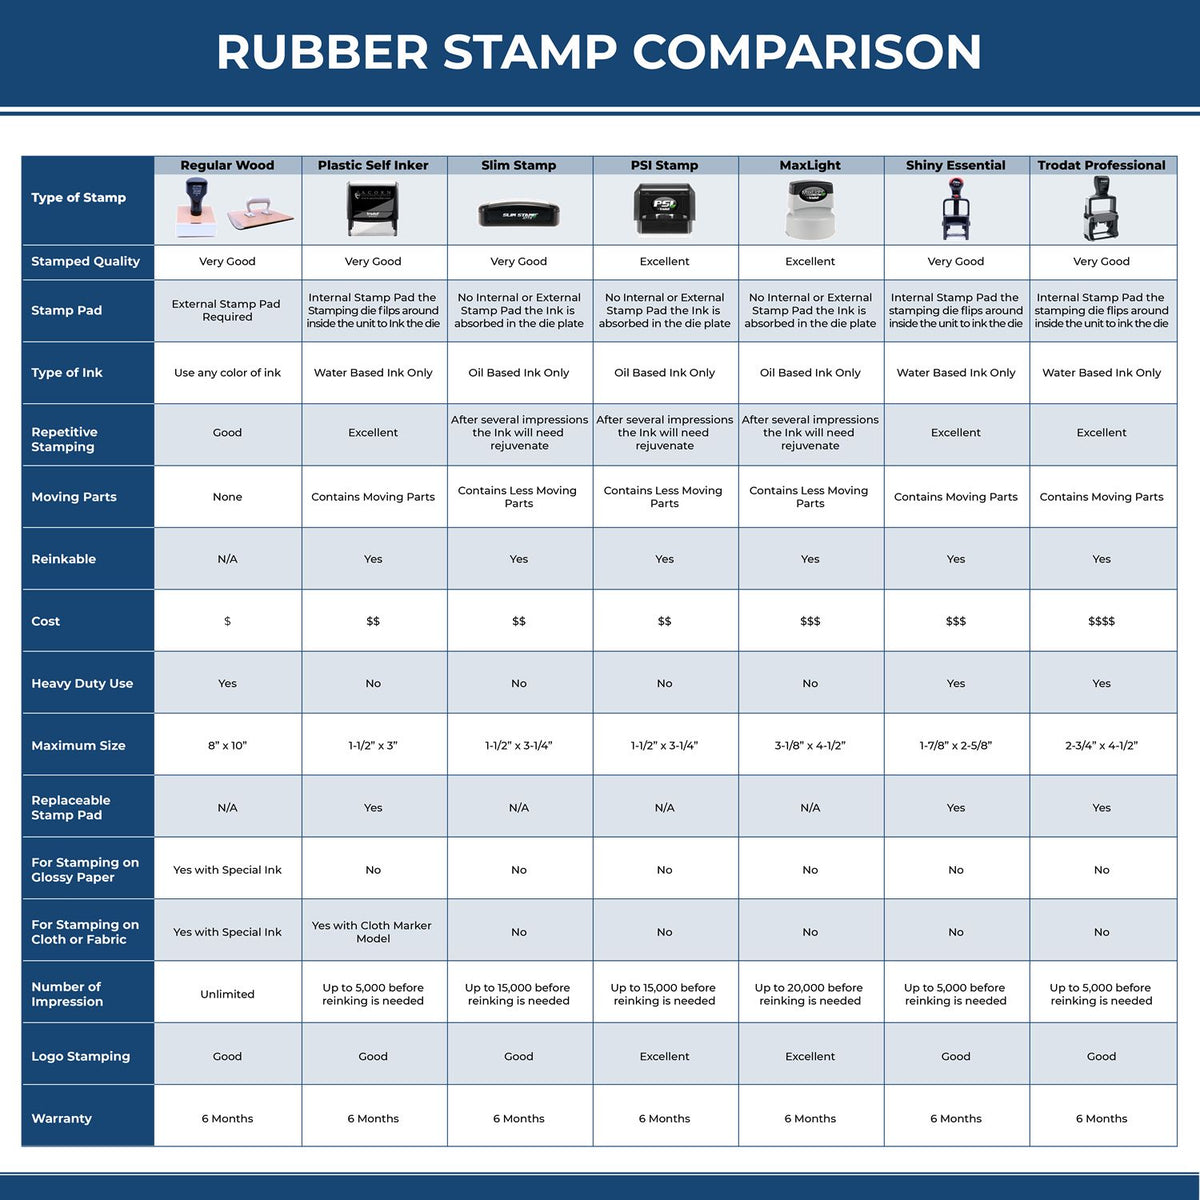 A comparison chart for the different types of mount models available for the Self-Inking Michigan PE Stamp.